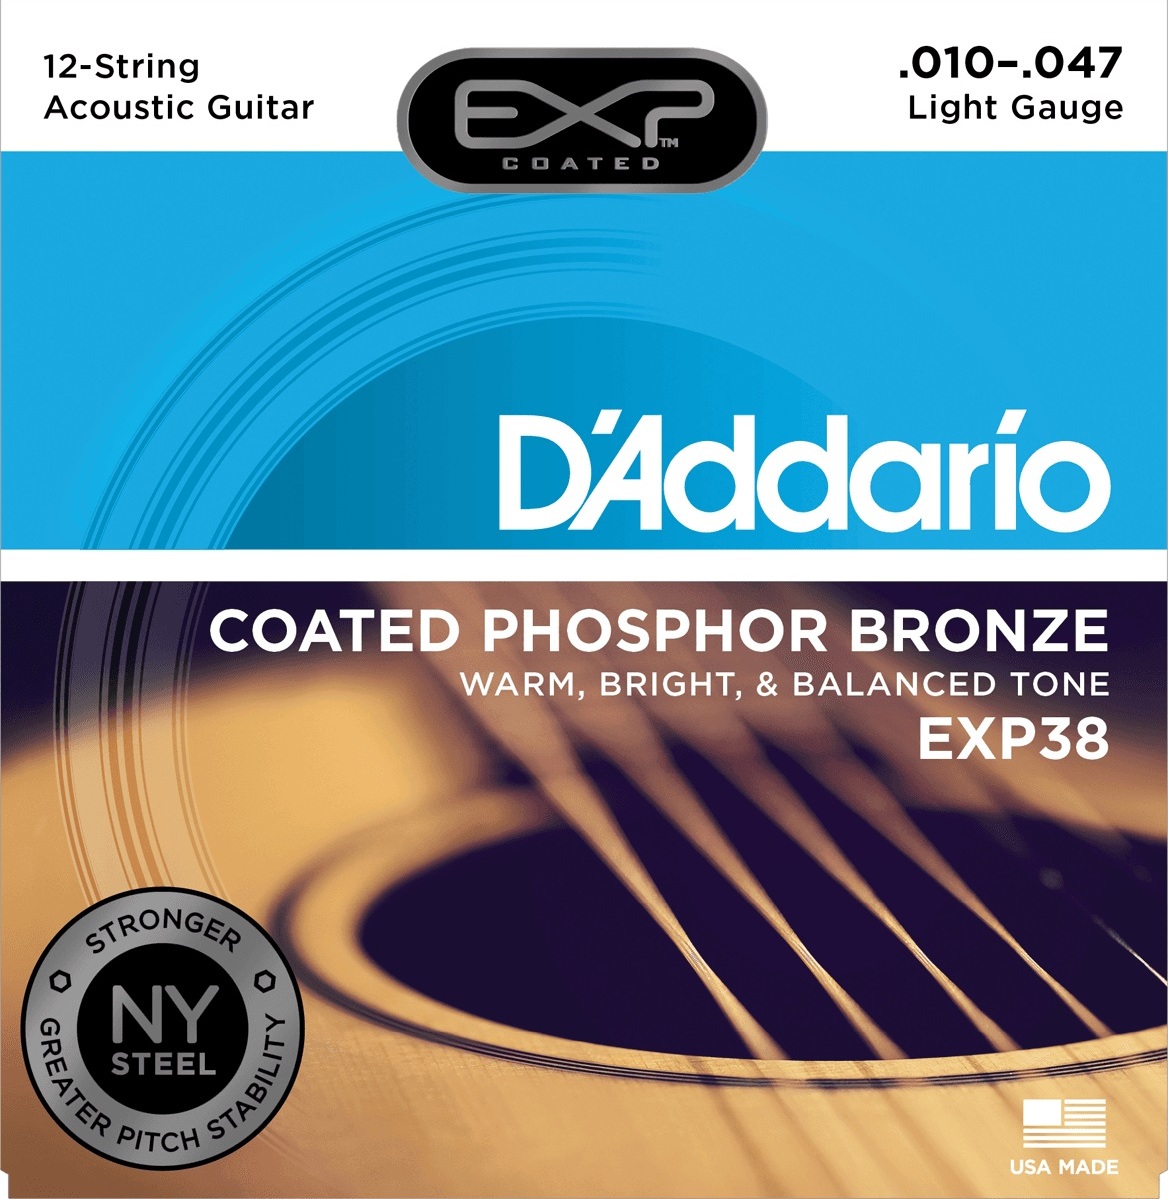 D'addario Exp38 Coated Phosphor Bronze Light 12-string 10-47 - Acoustic guitar strings - Main picture